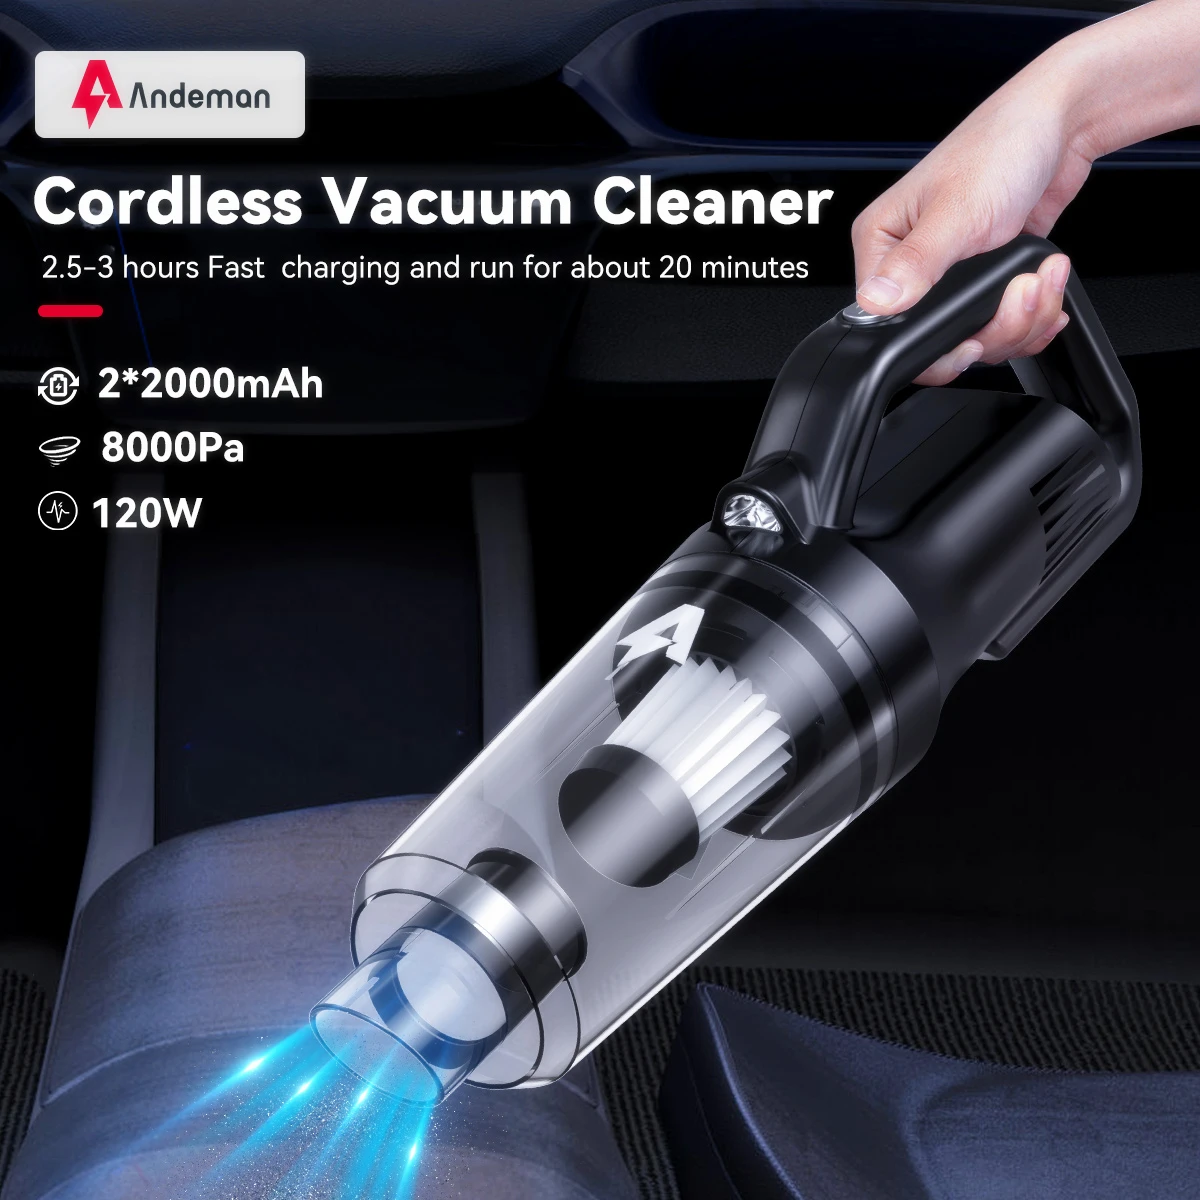 

8000Pa Portable Cordless Vacuum Cleaner 120W Handheld Suction Rechargeable Wireless for Auto Car Home Household Pet Cleaning